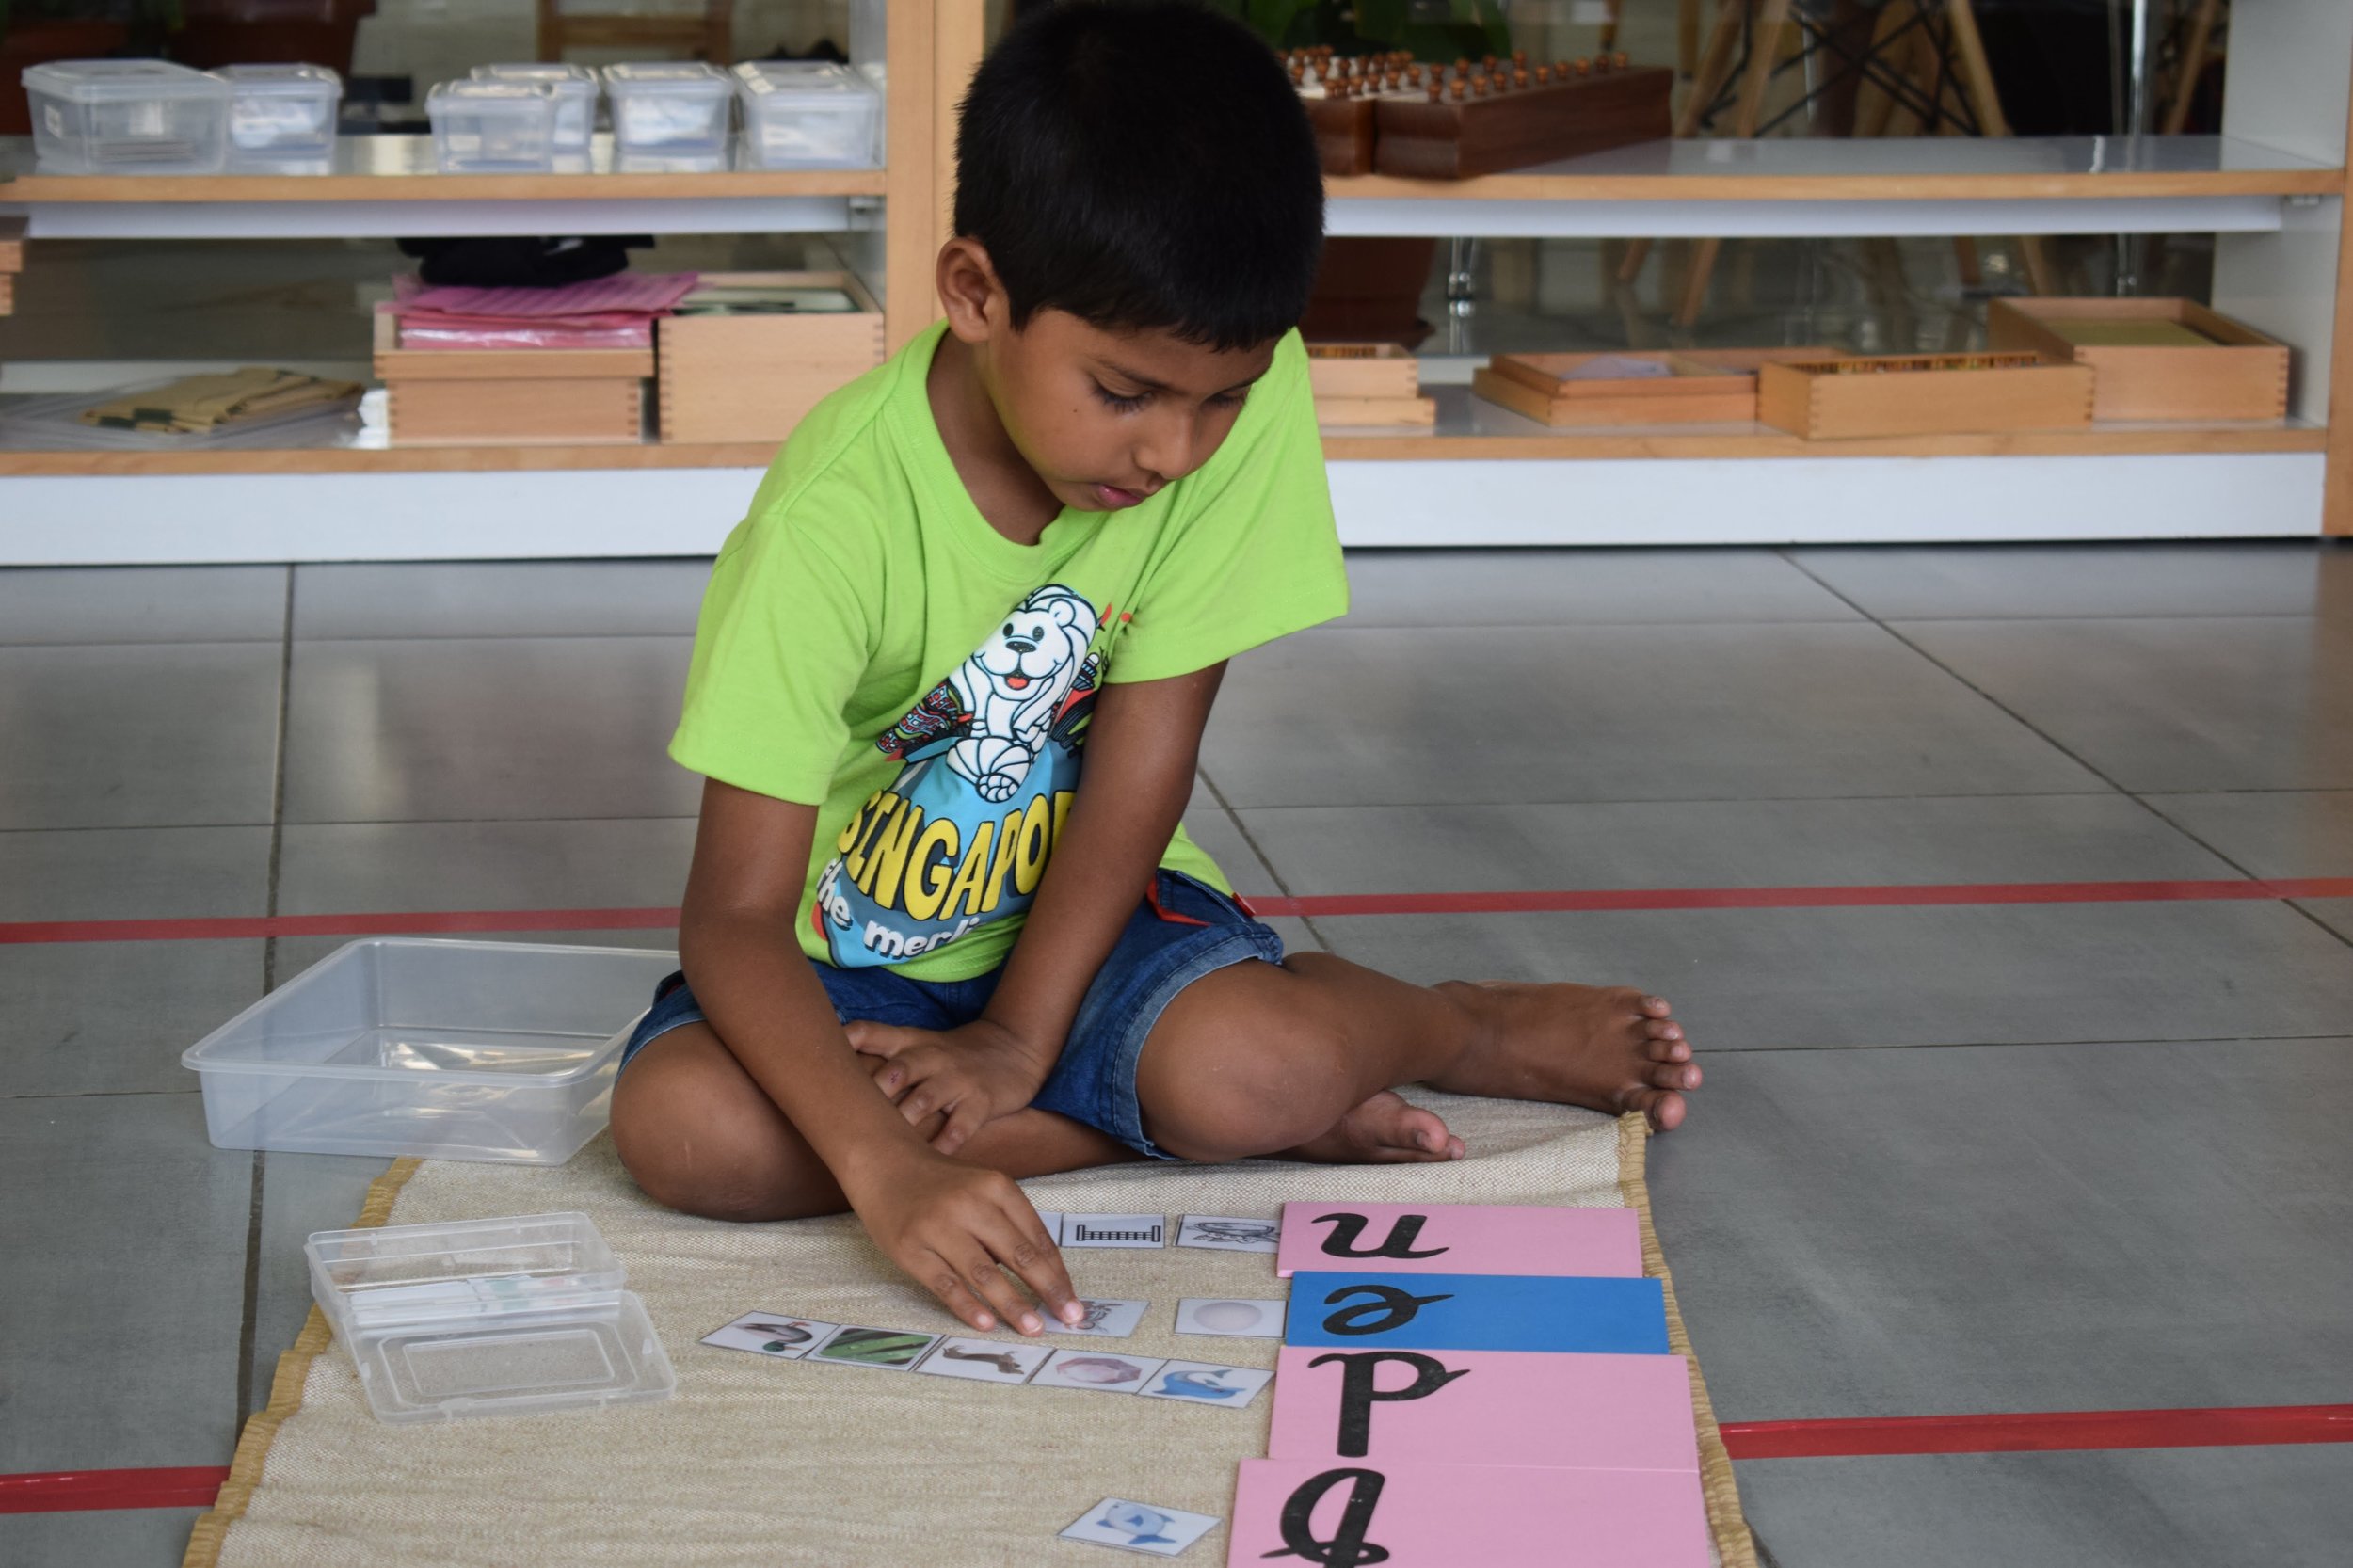 Building words with the movable alphabets